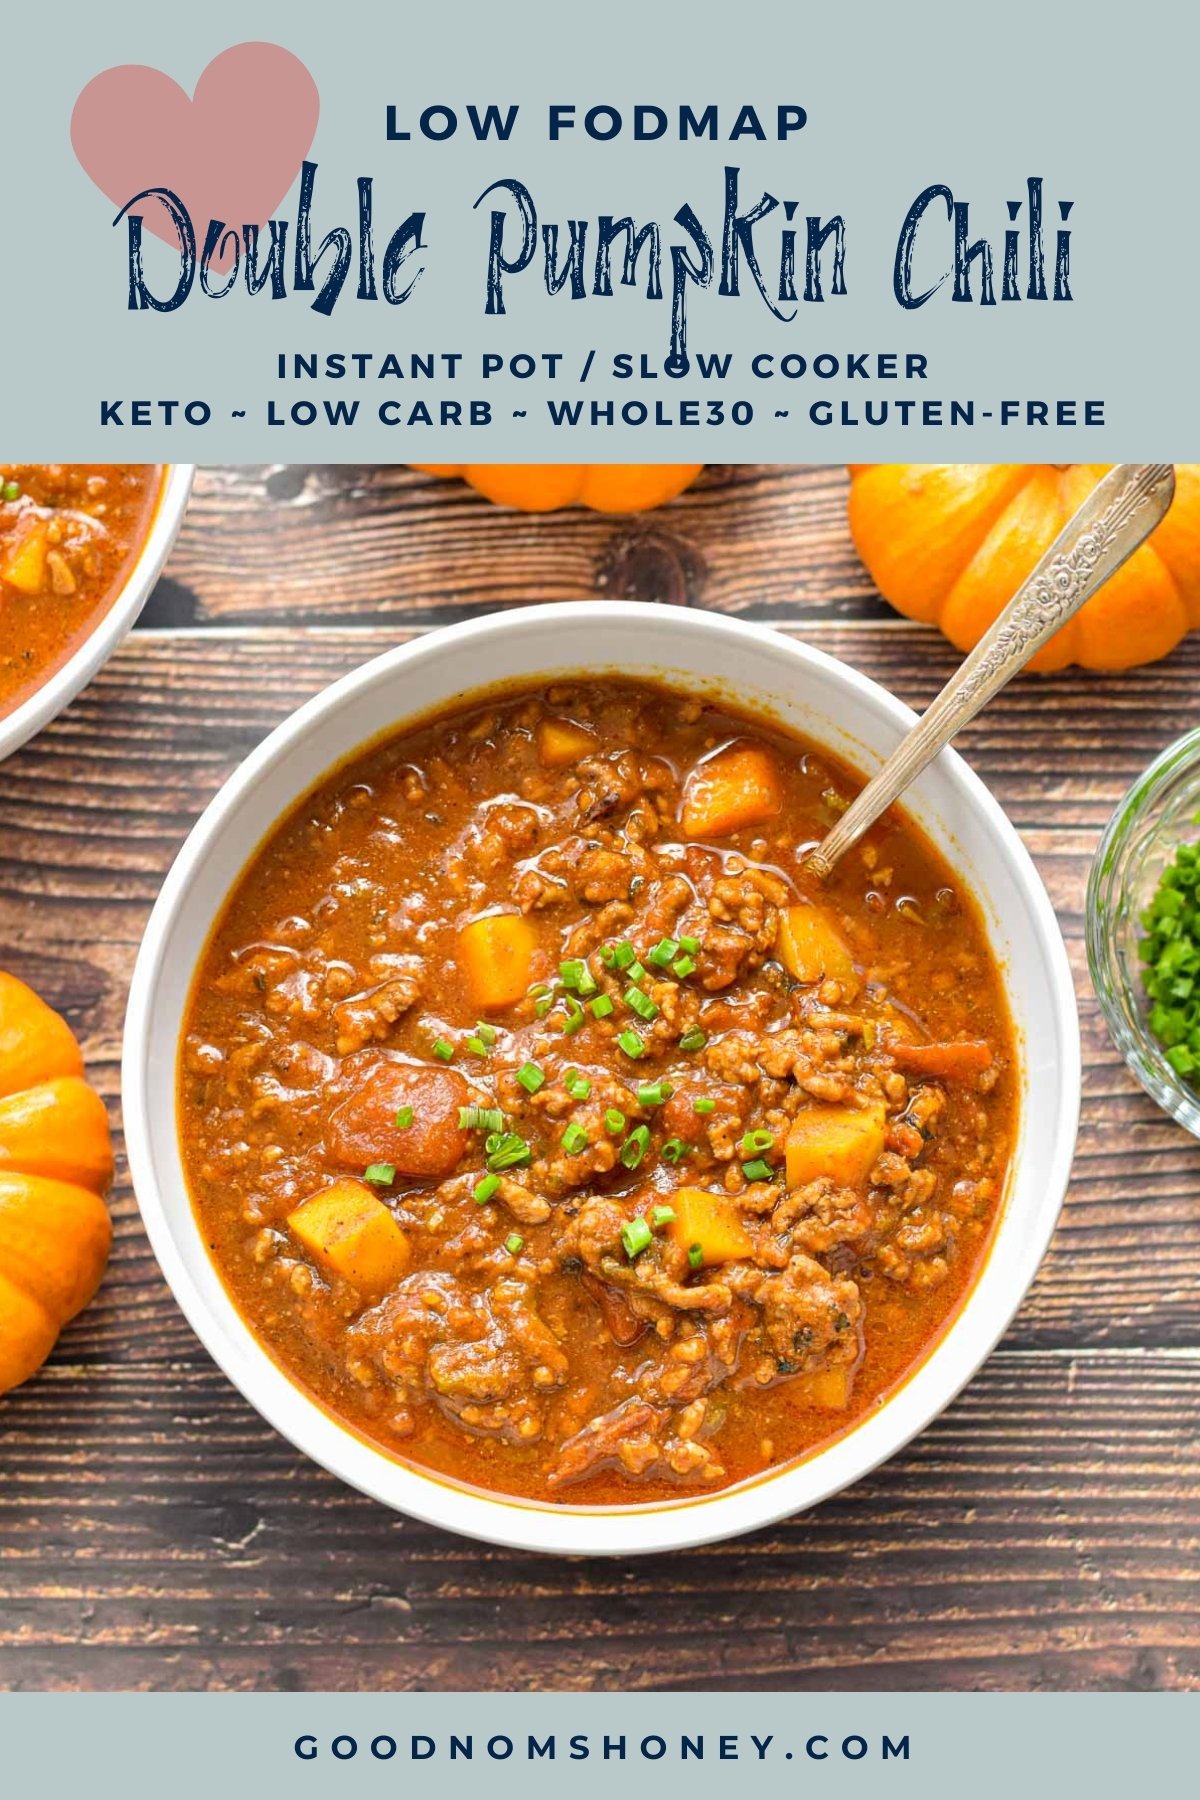 pinterest image with low fodmap double pumpkin chili instant pot / slow cooker keto low carb whole30 gluten-free at the top and goodnomshoney.com at the bottom